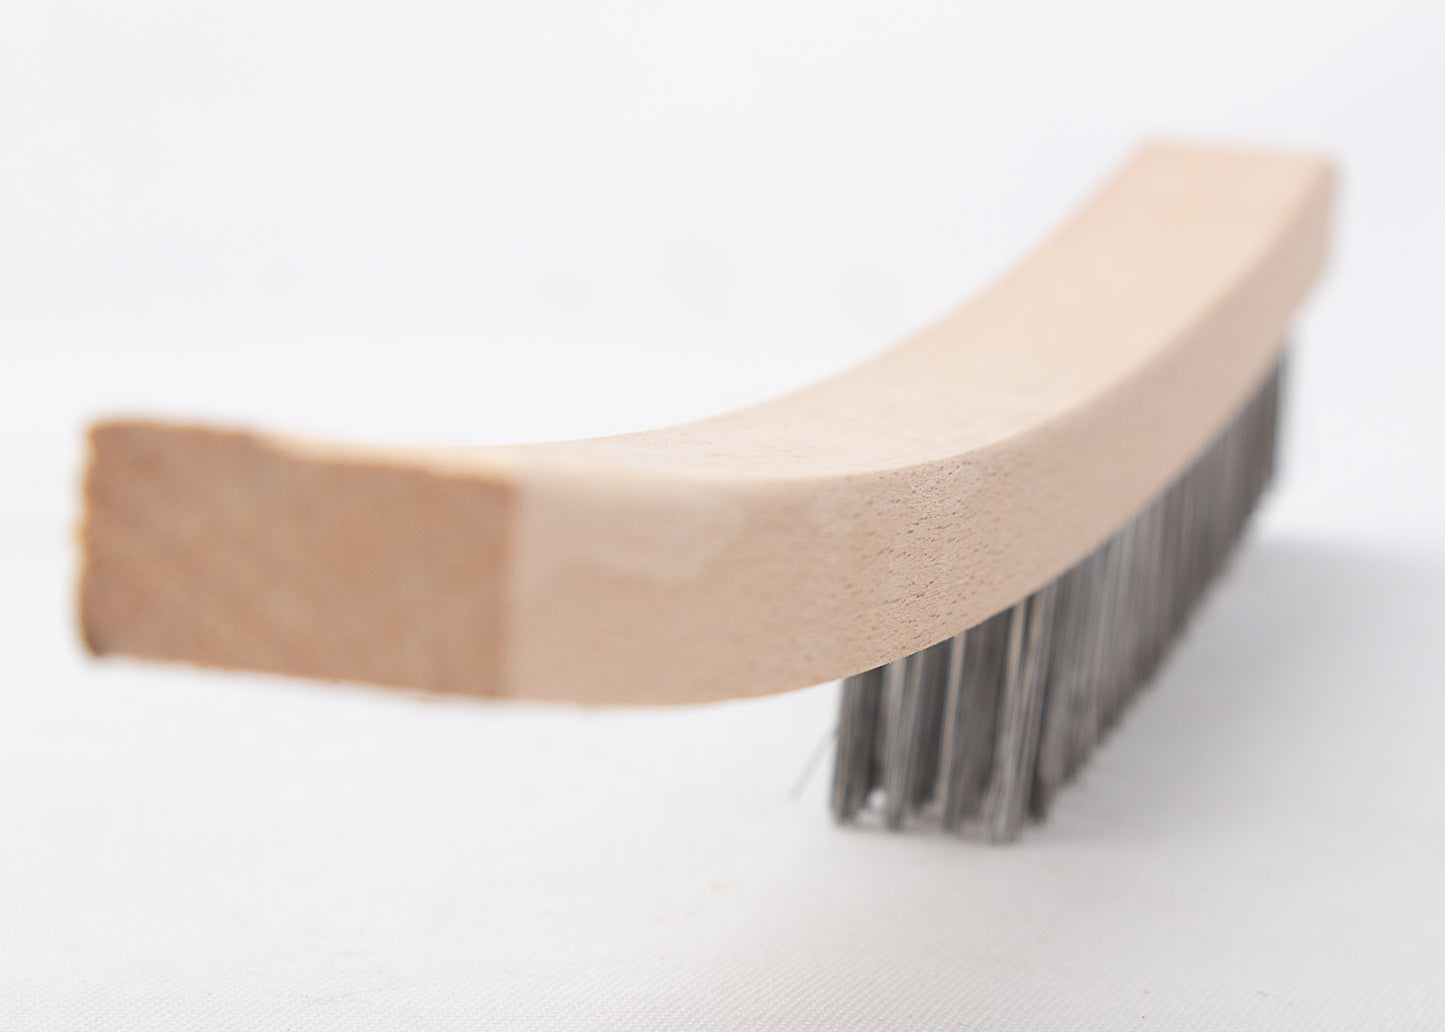 the curved wooden handle of our wire scratch brush